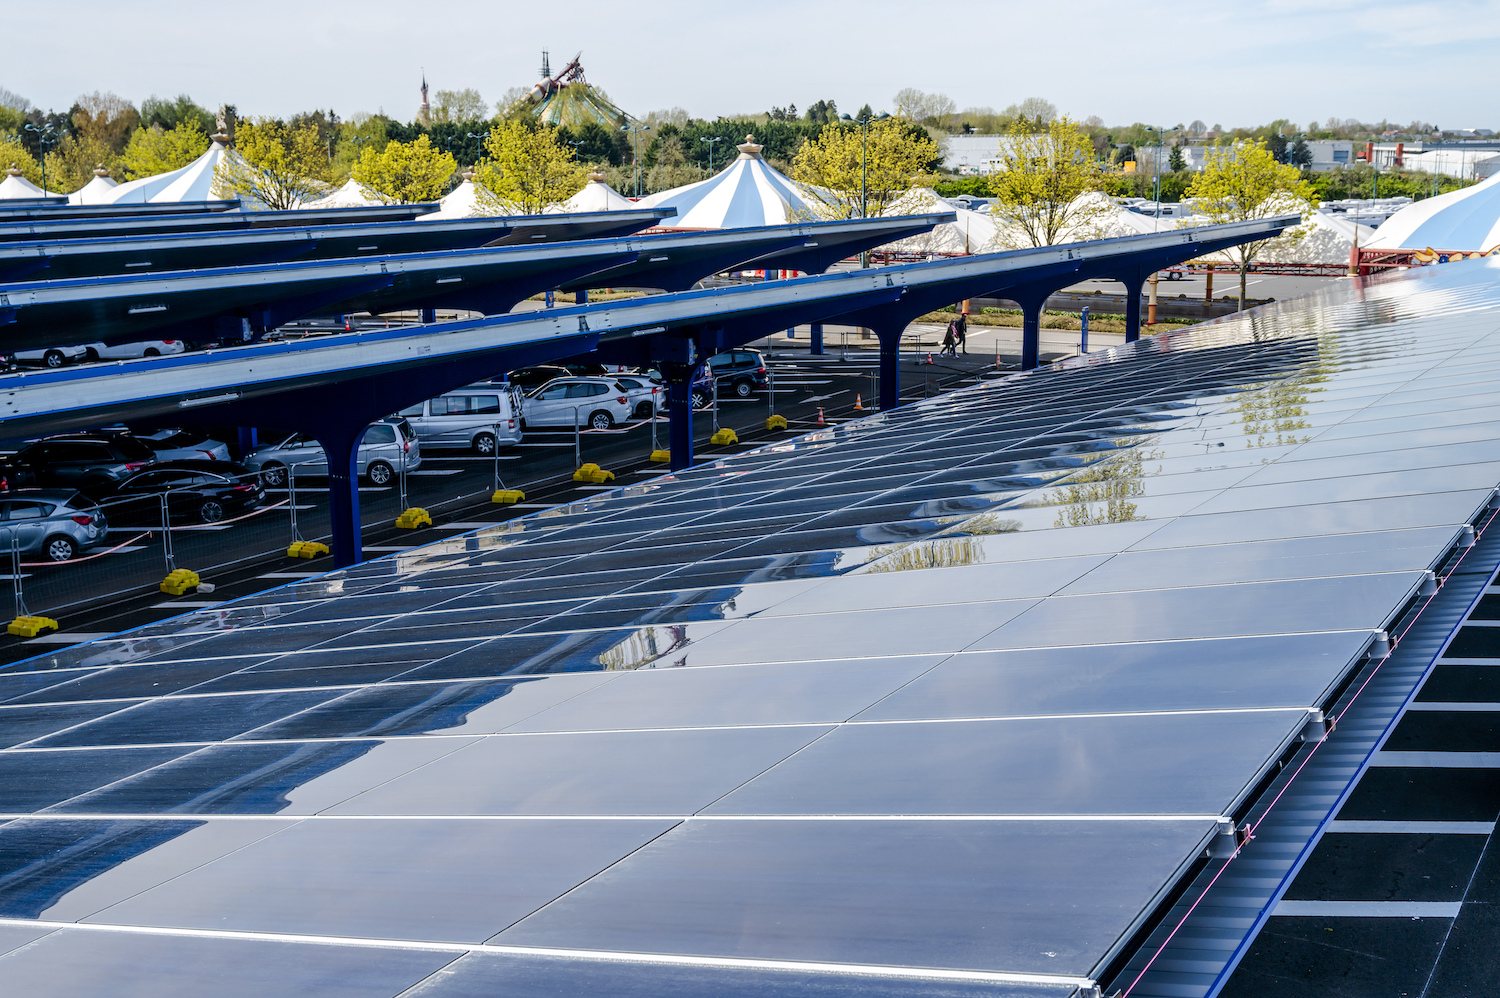 Disneyland Paris to complete final phase of the largest European solar canopy plant by end of 2023